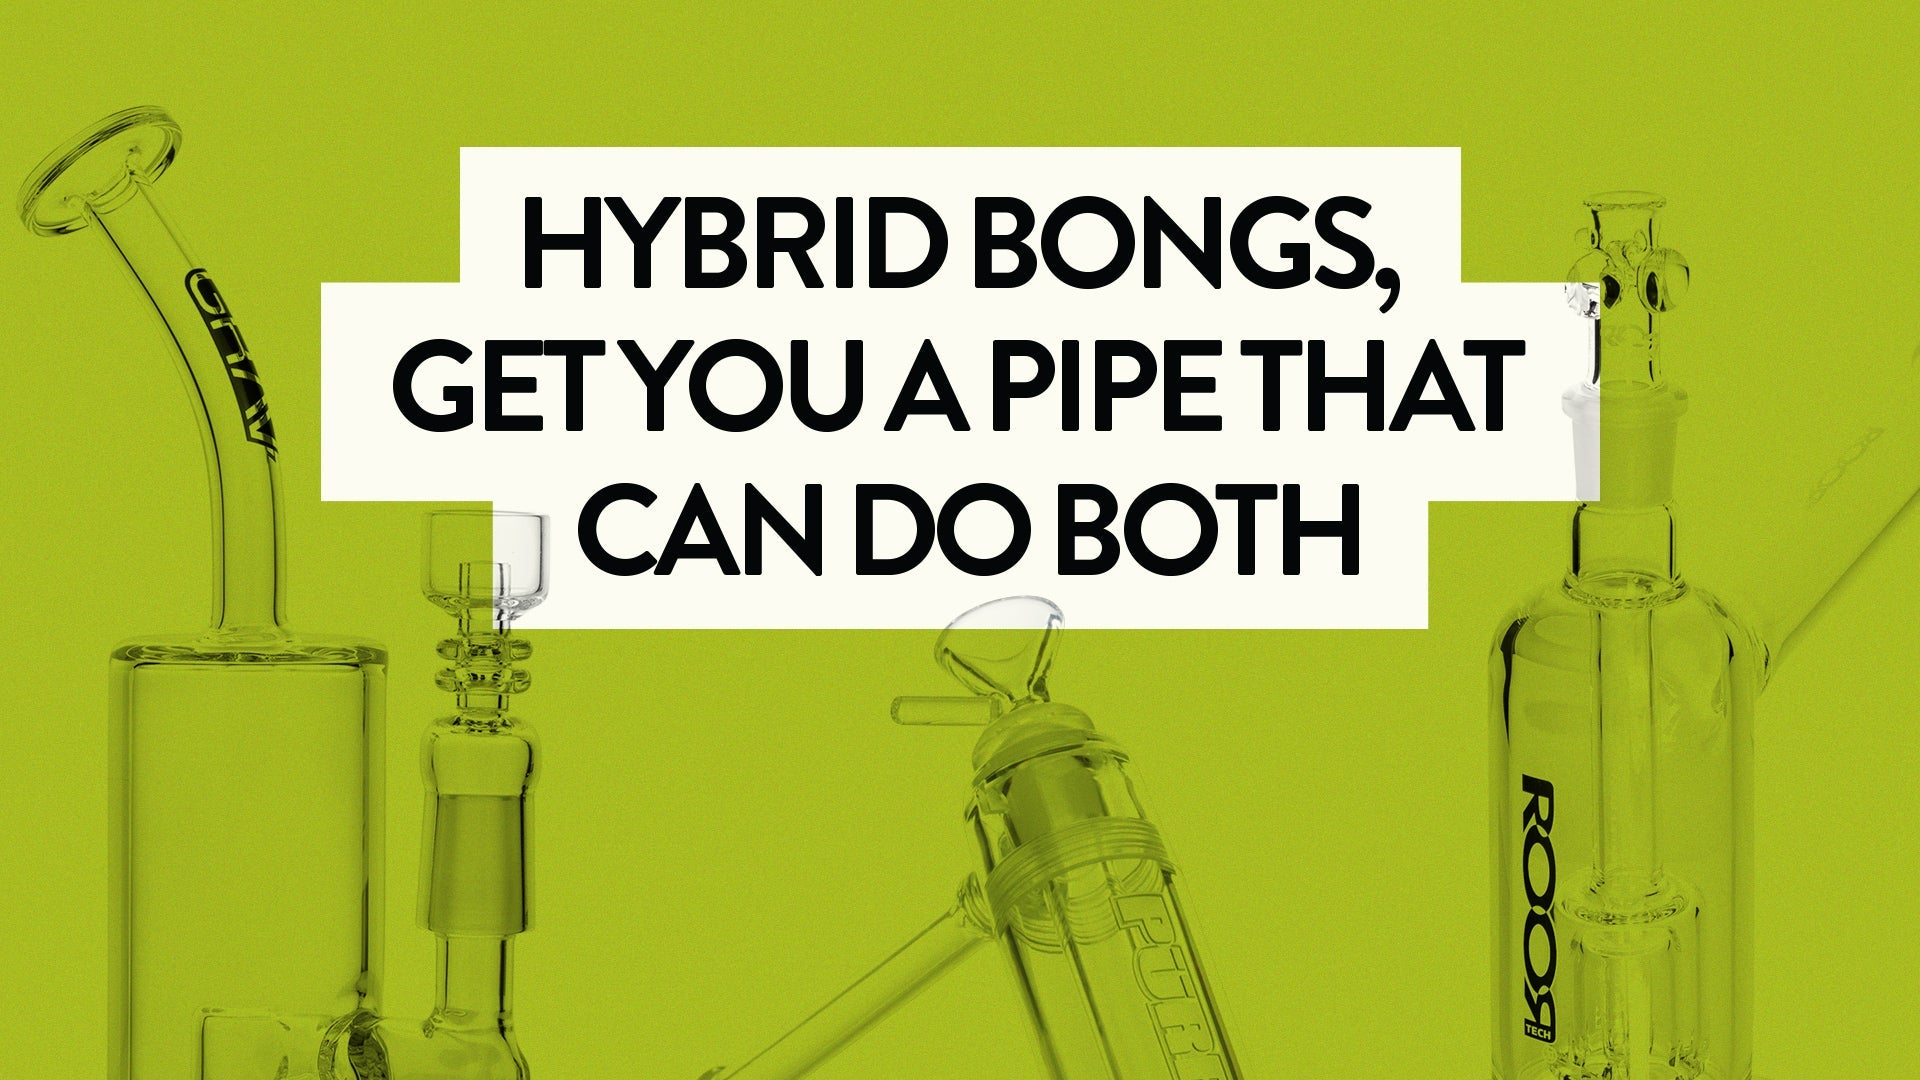 Get a Pipe That Does Both: Hybrid Bongs and Rigs - 420 Science